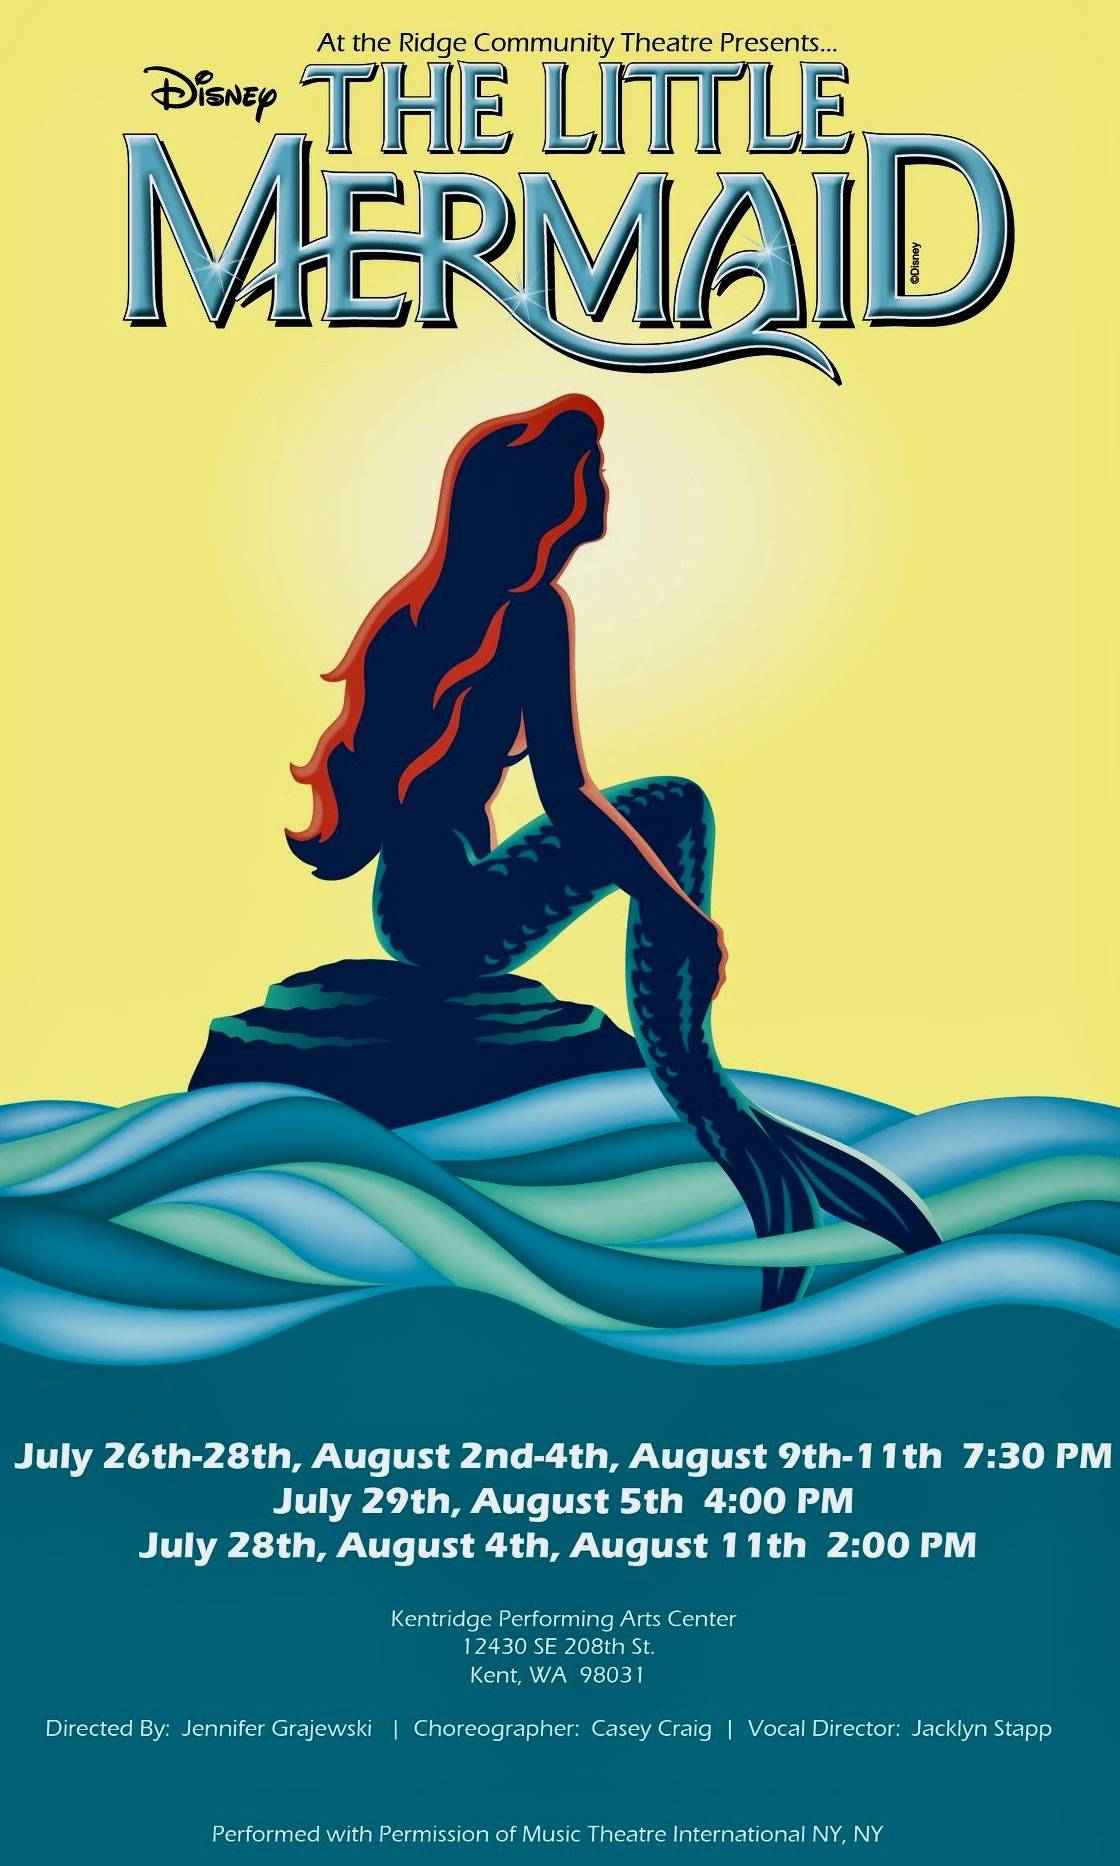 At the Ridge Theatre to perform ‘The Little Mermaid’